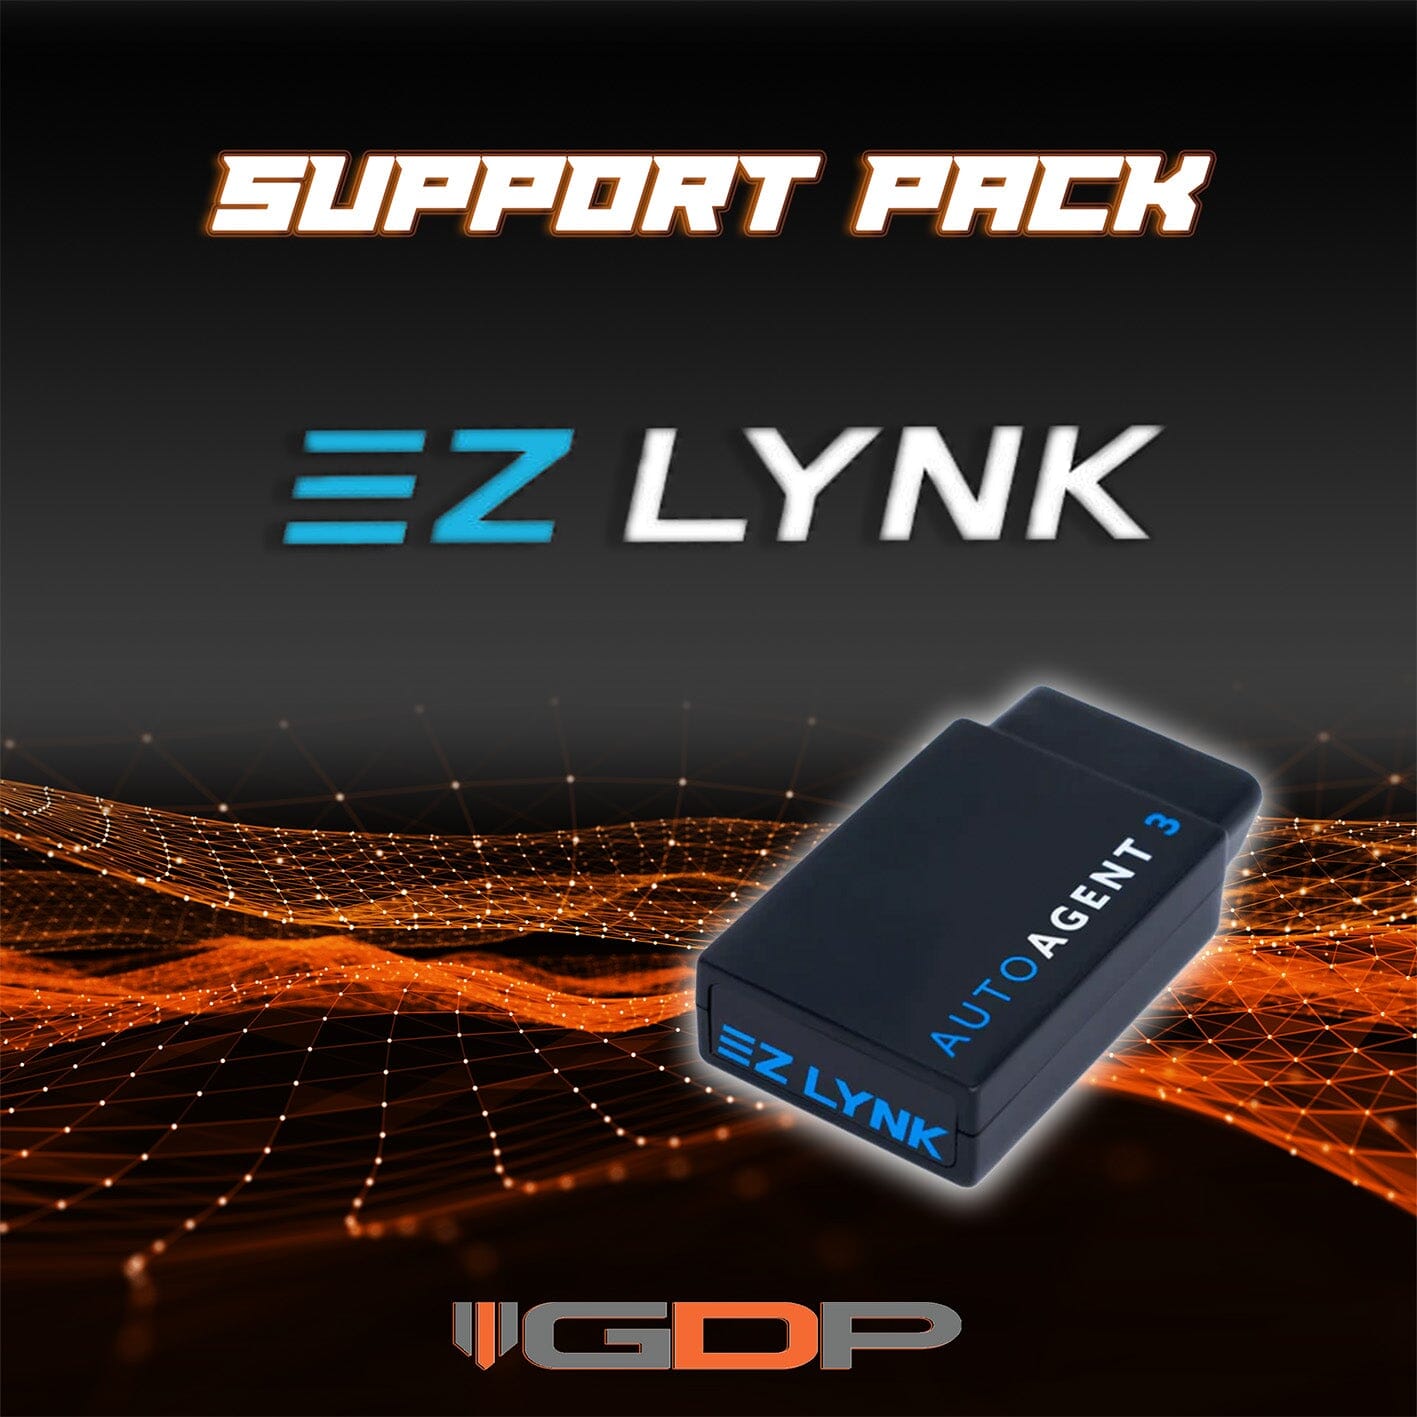 EZ Lynk Auto Agent 3 w/ GDP Lifetime Support Pack (2014-2019 3.0L Eco Diesel) Tune Package GDP 